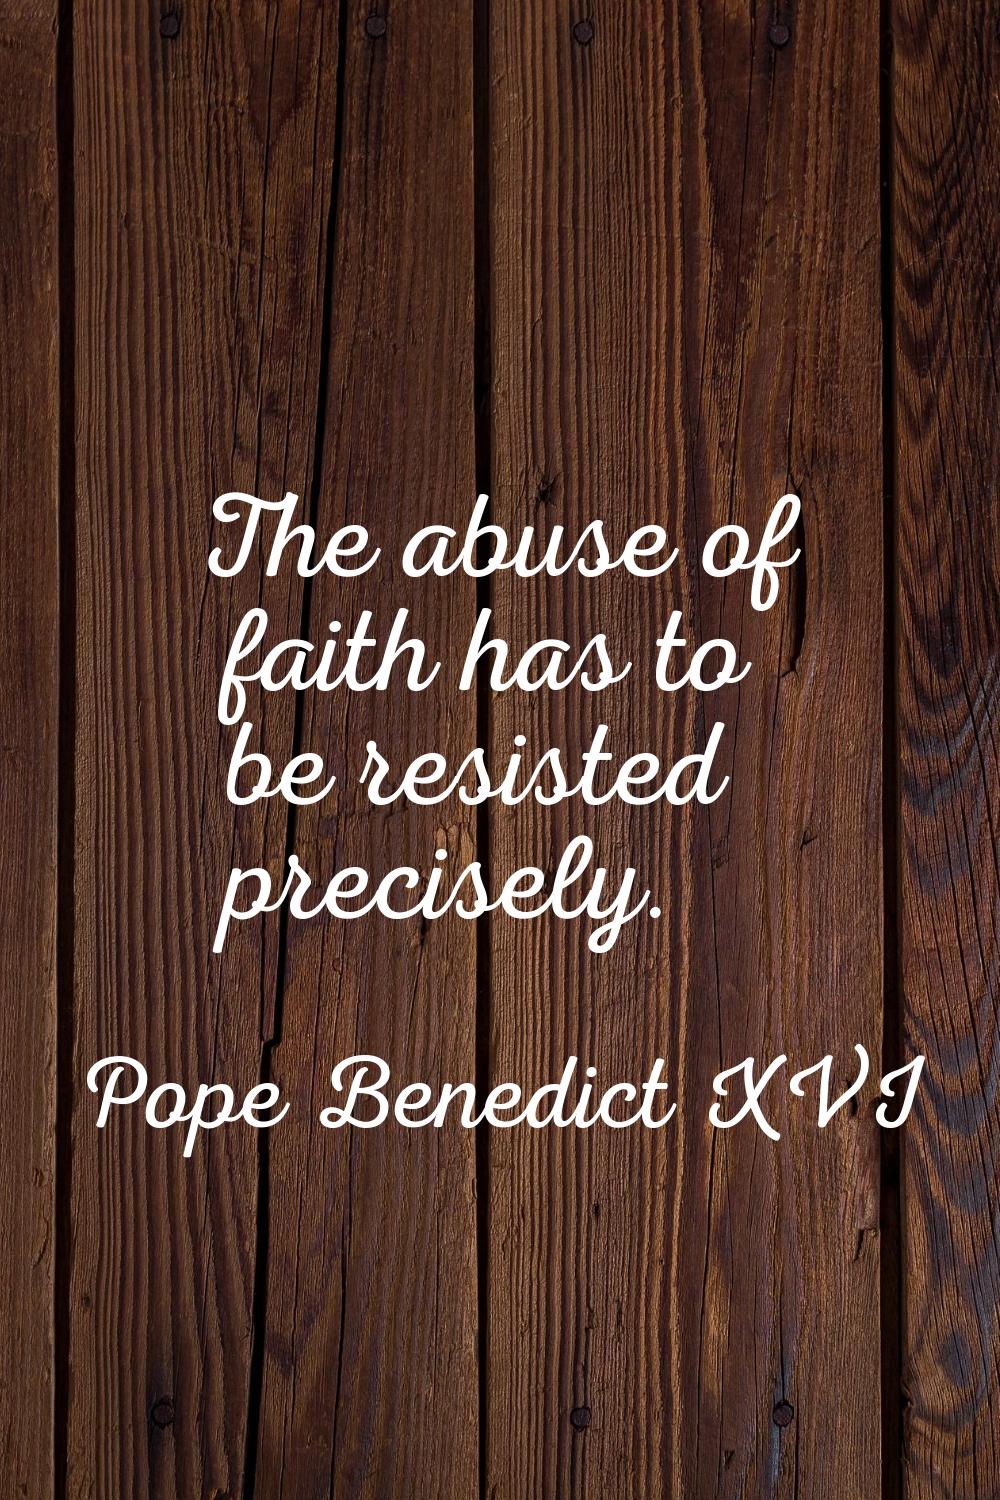 The abuse of faith has to be resisted precisely.